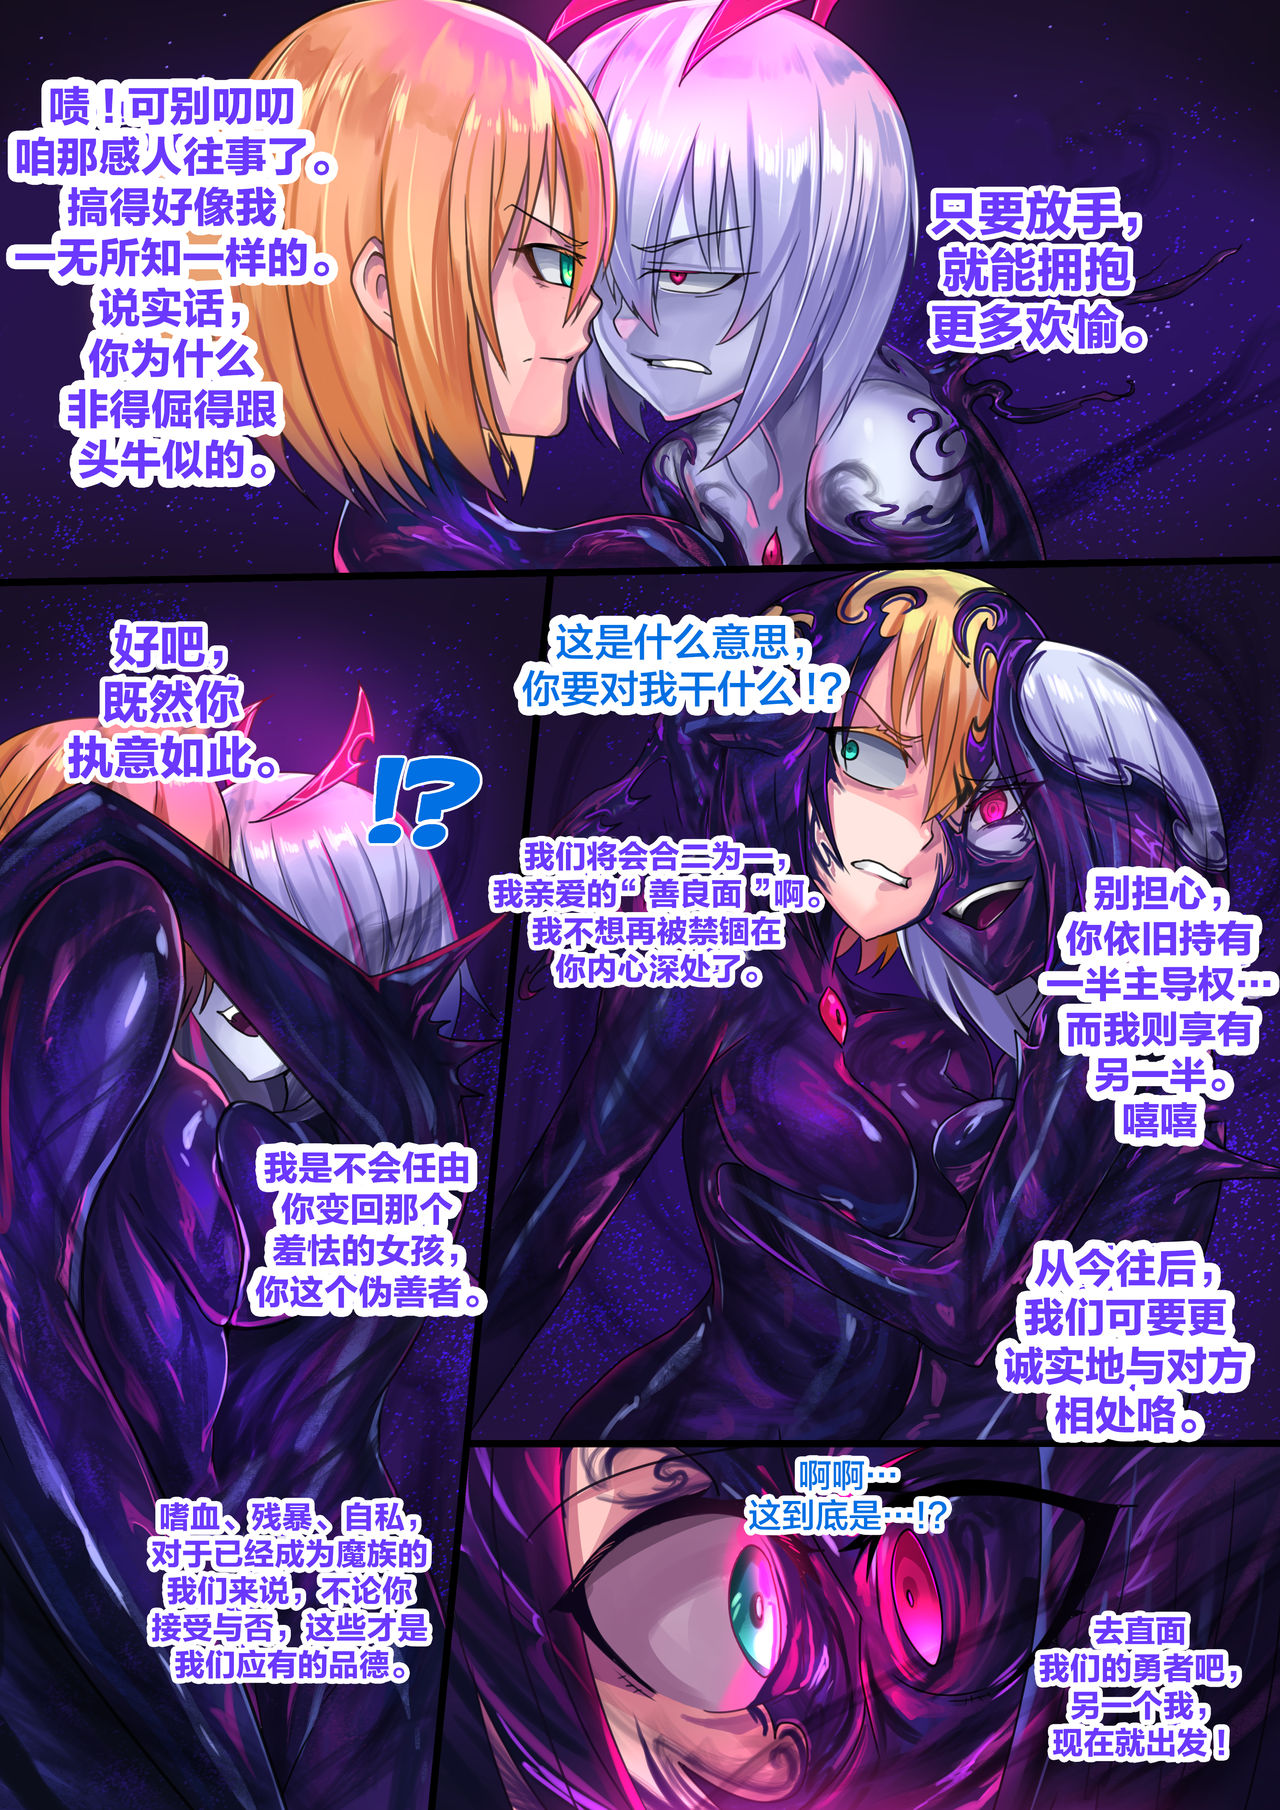 [ibenz009] Demon lord Chapter 2 [Chinese] [不咕鸟汉化组] [ibenz009] Demon lord Chapter 2 [中国翻訳]